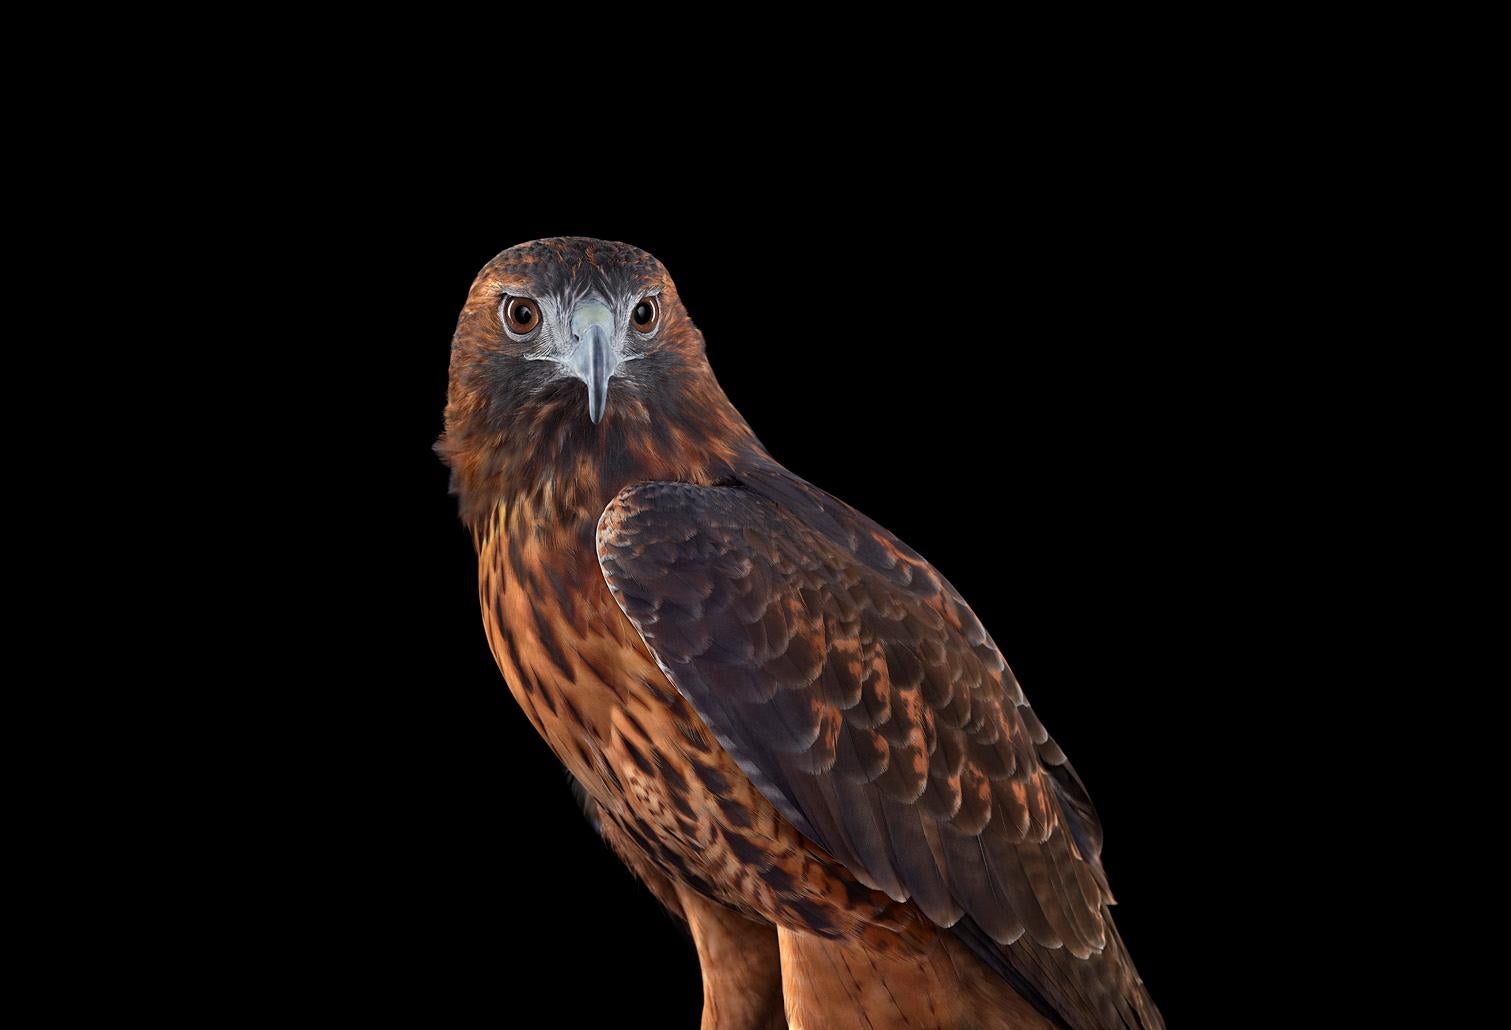 Brad Wilson Color Photograph – Roter roter tailed Hawk #1, Espanola, NM, 2011